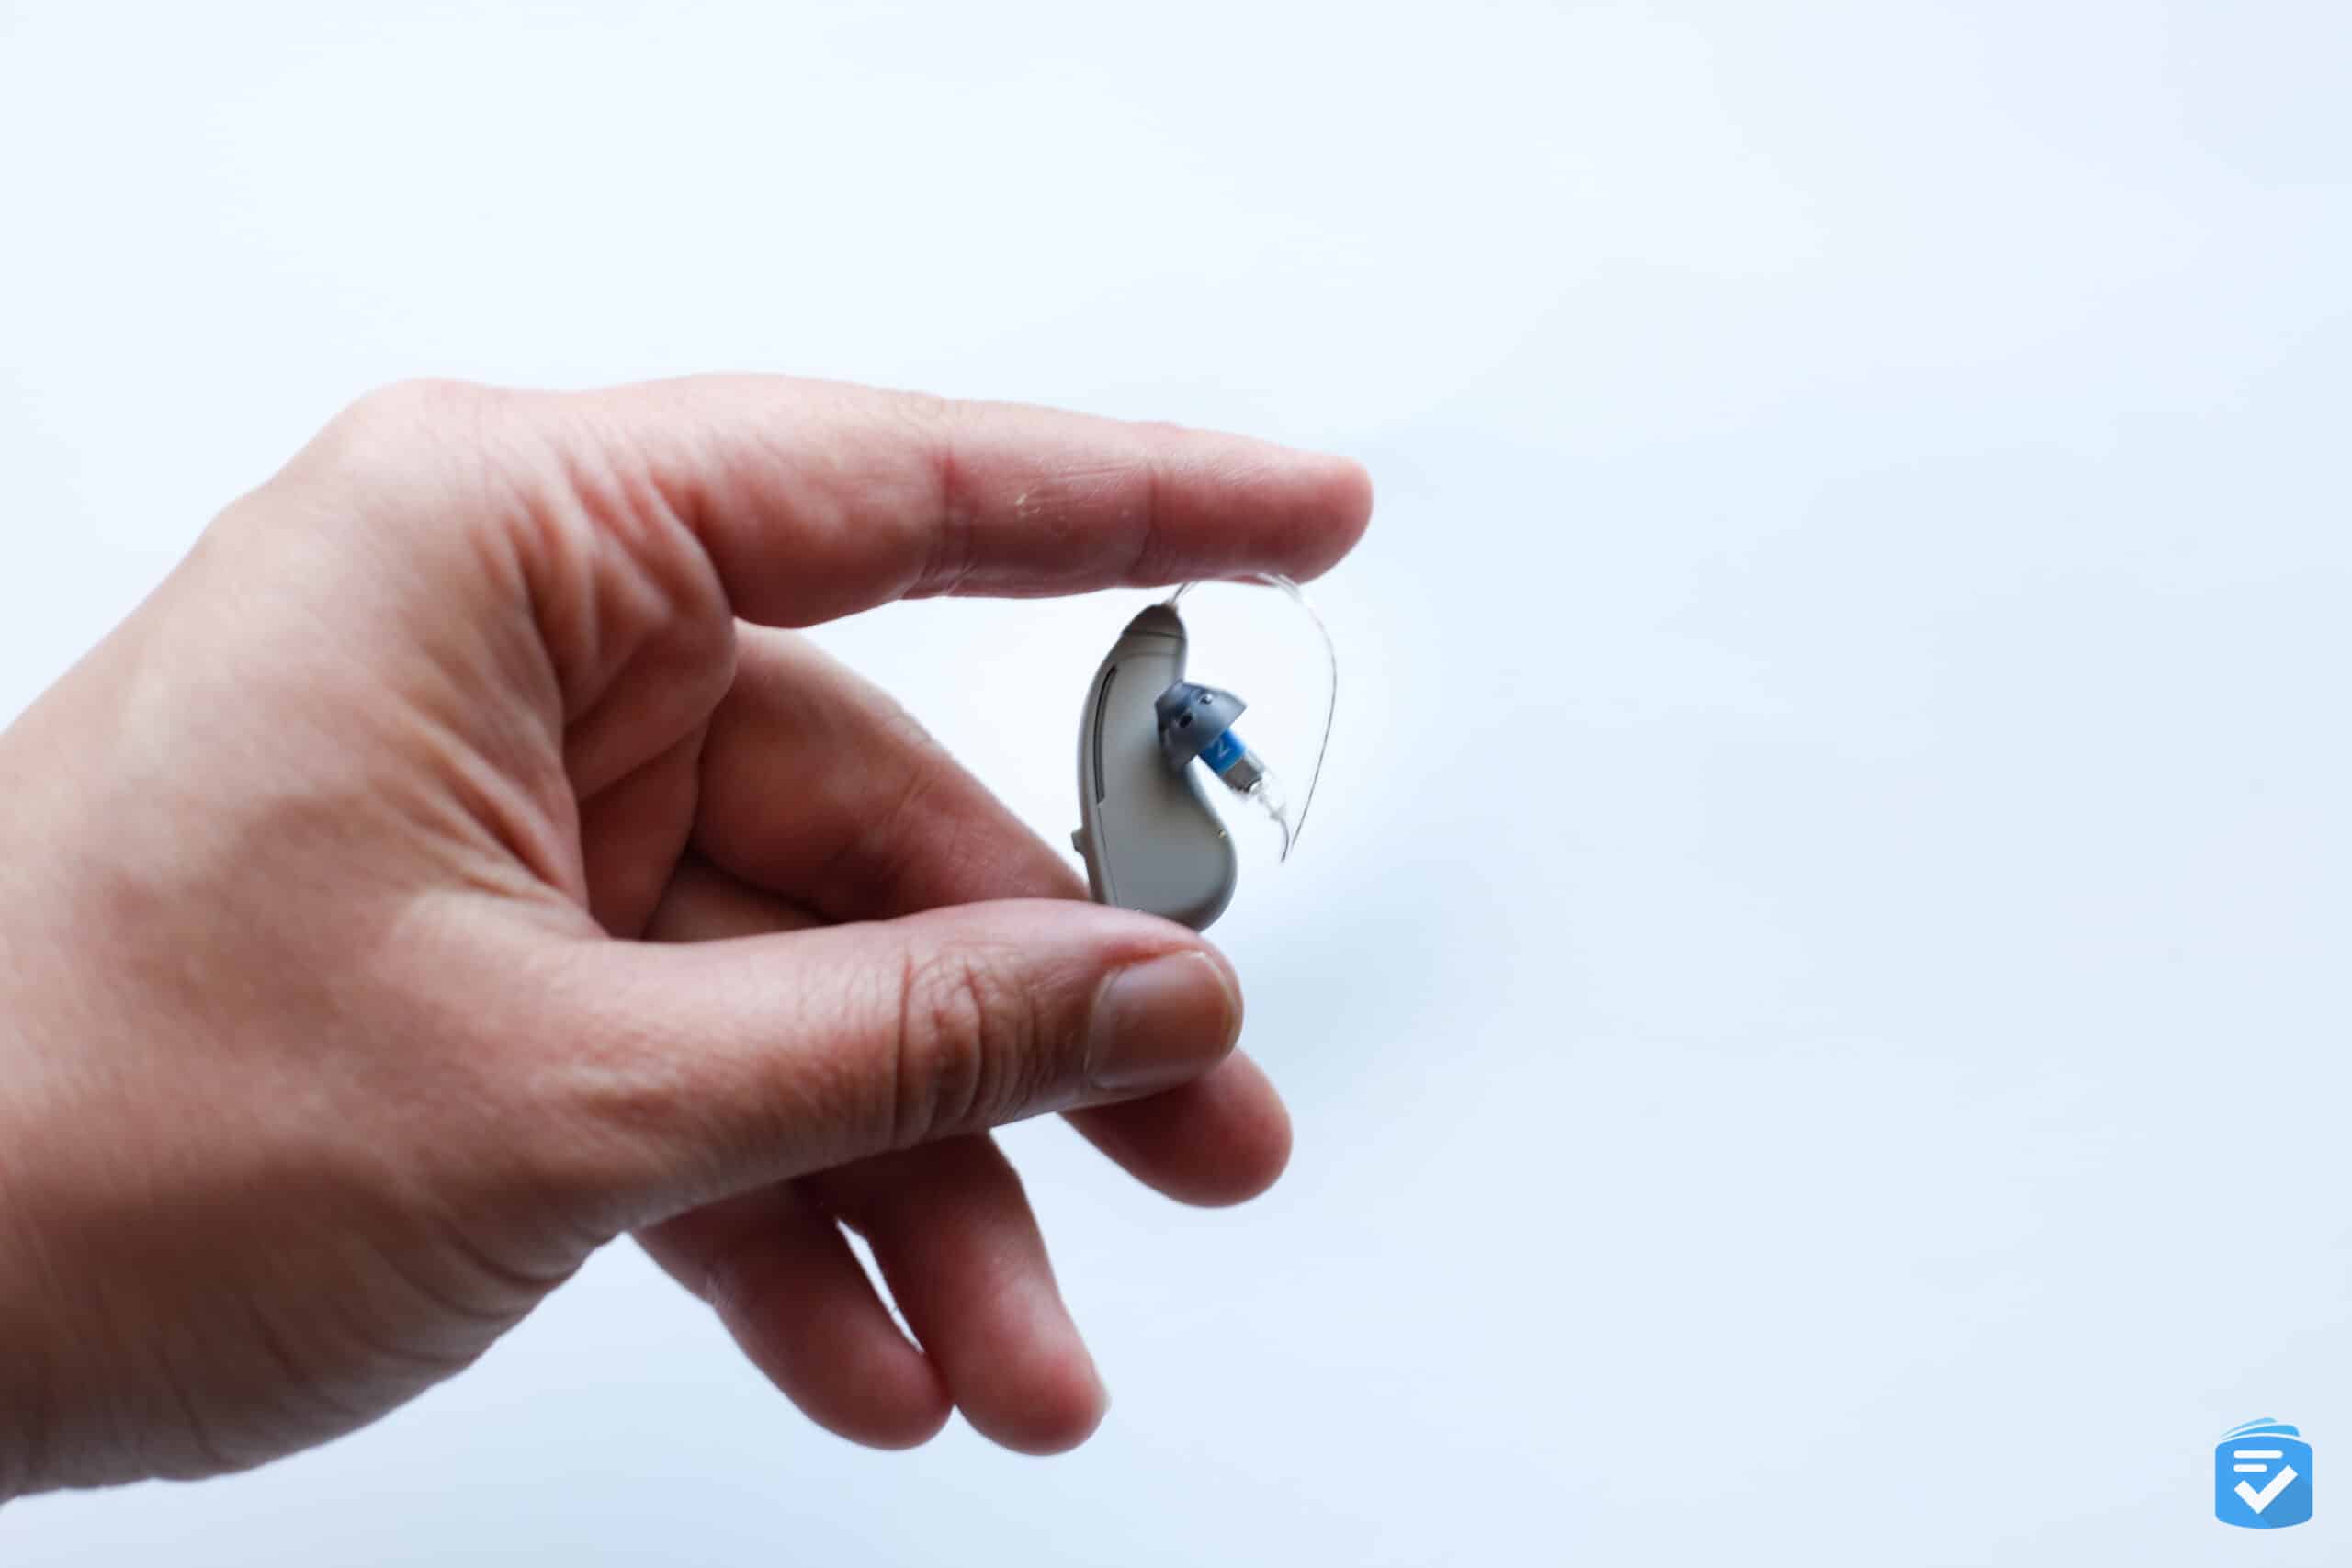 Bose SoundControl Hearing Aids in hand